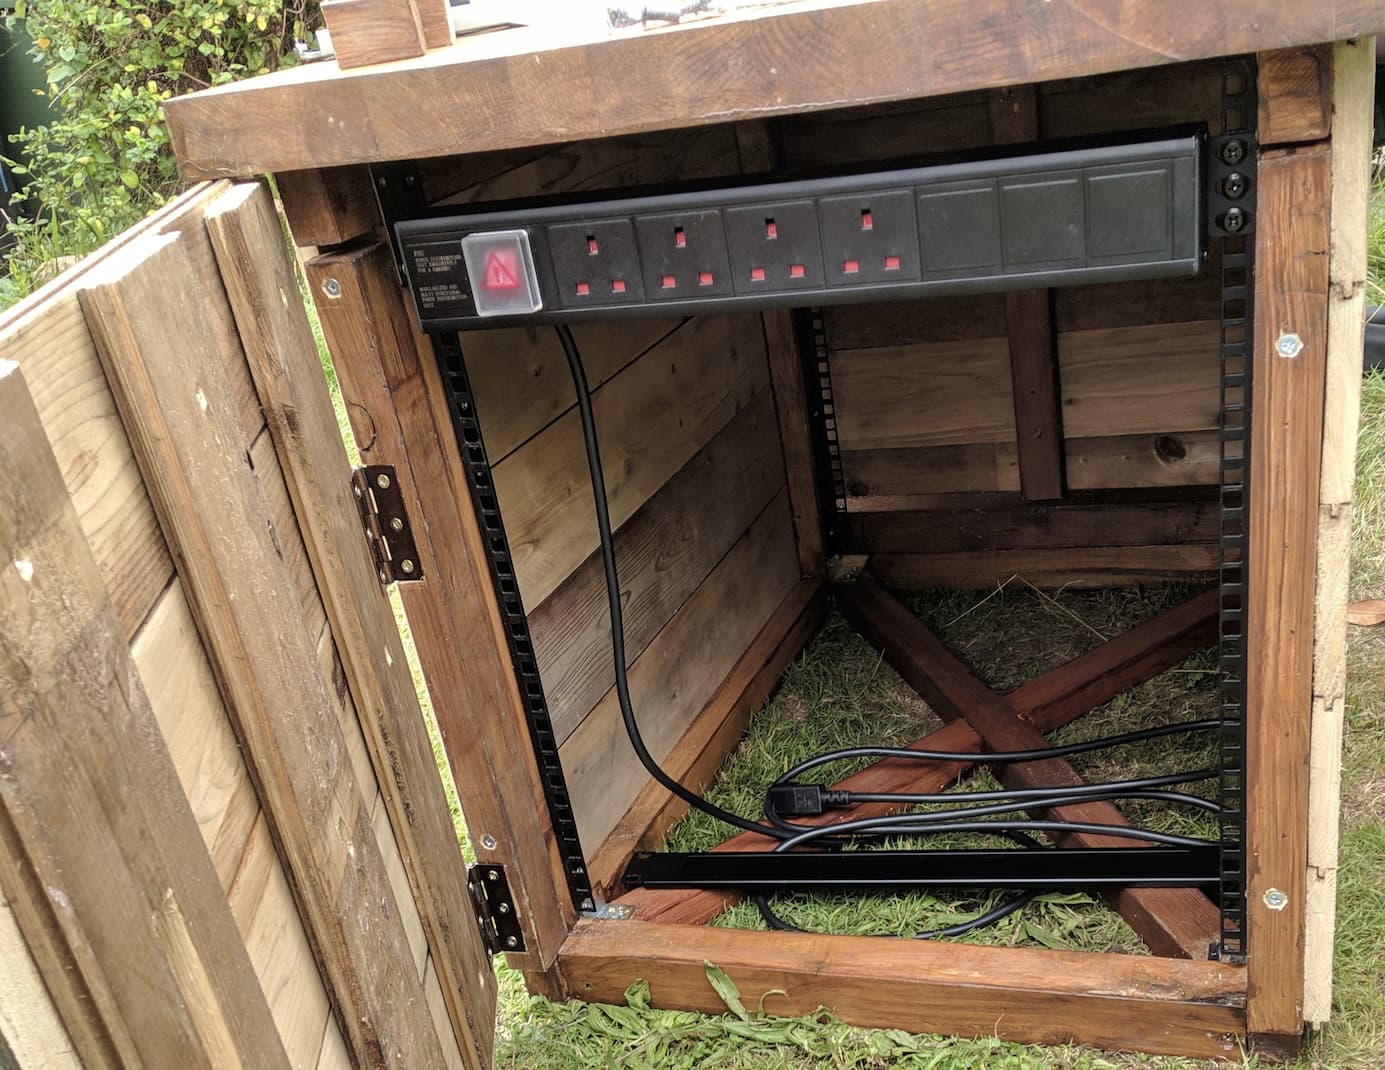 Inside the server cabinet, showing the cross brace and all the internal walls